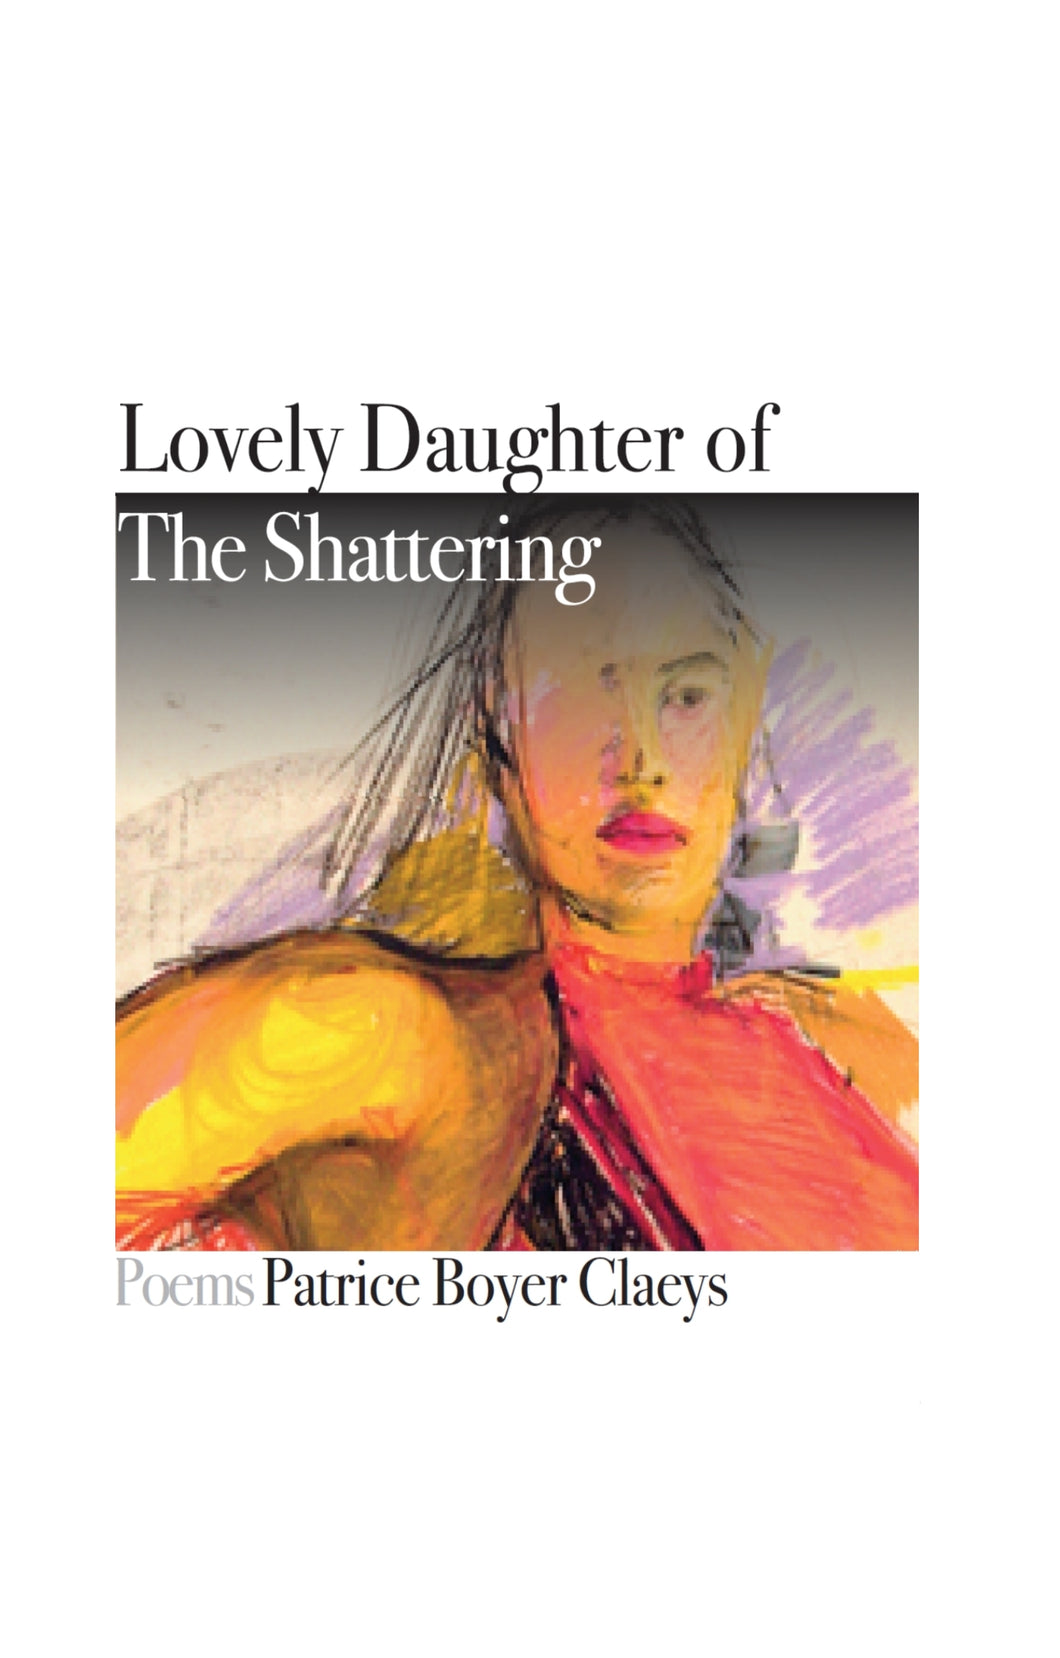 Lovely Daughter of The Shattering